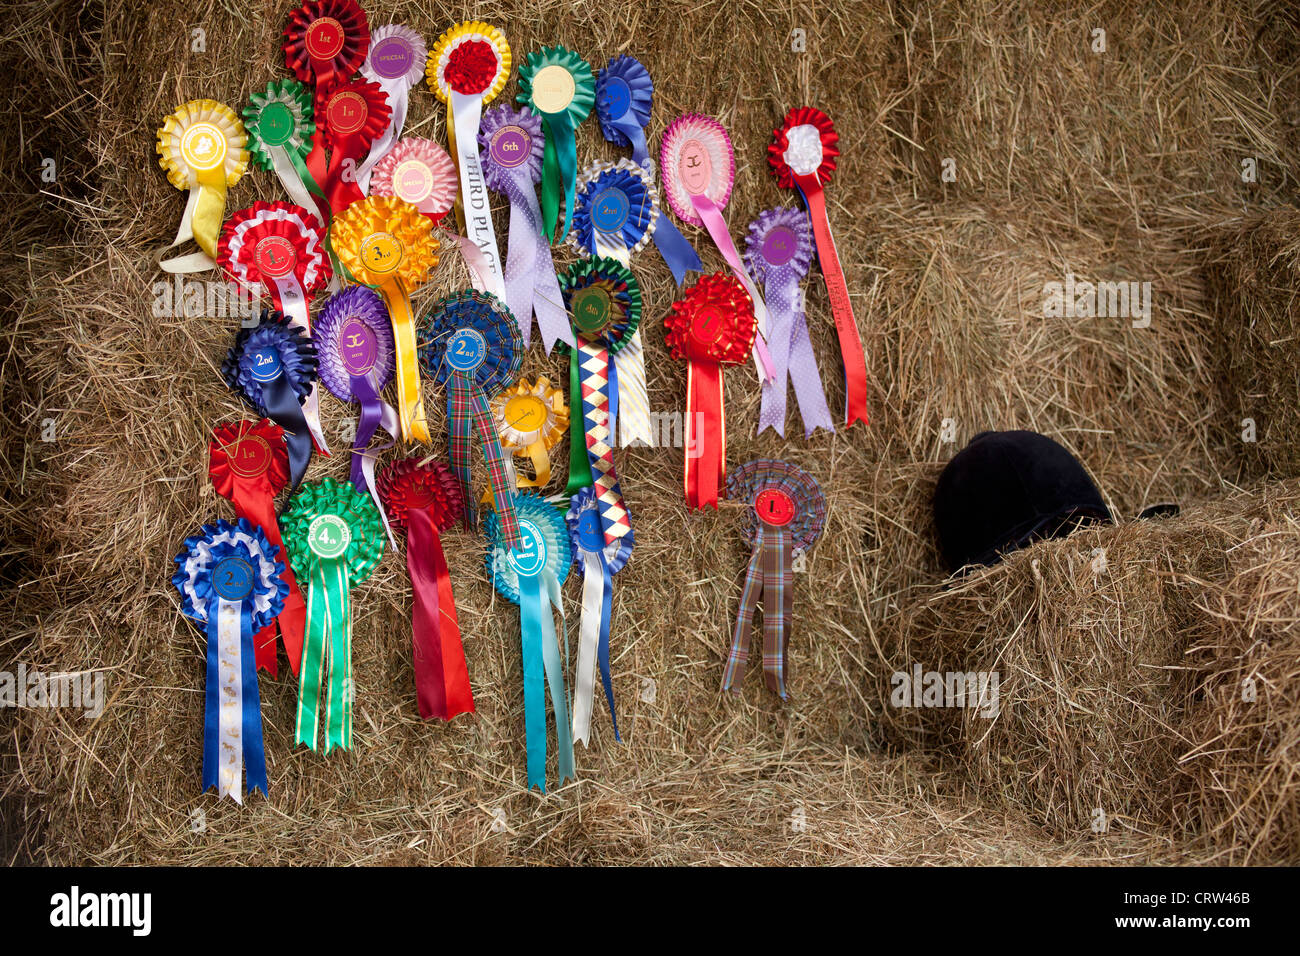 Horse riding rosettes and riding hat on hay bales Stock Photo